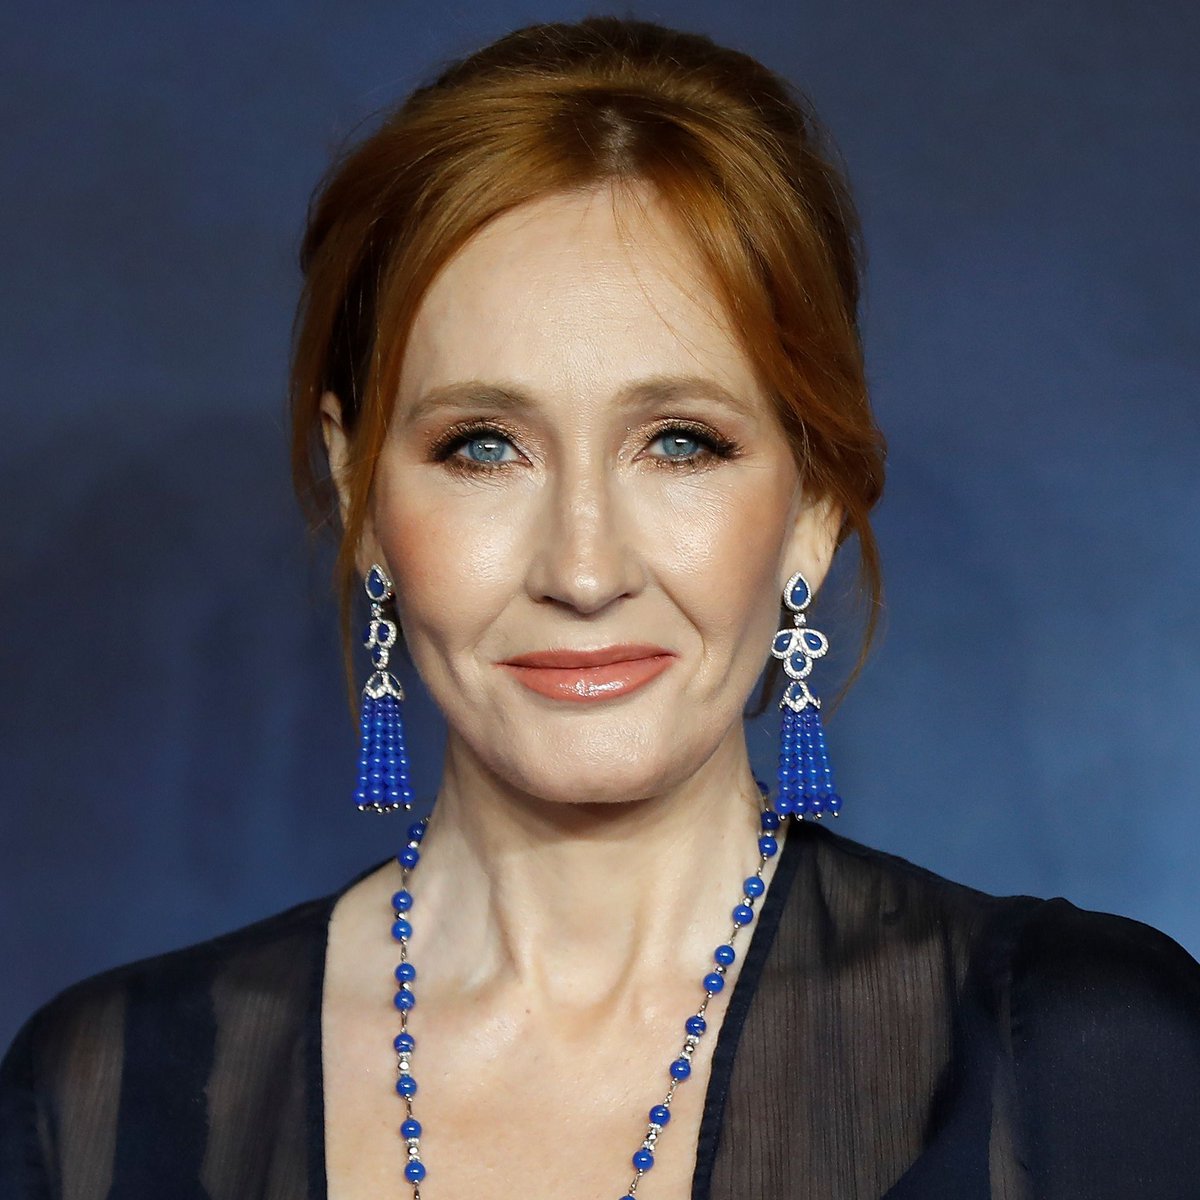 🚨BREAKING: Legendary Harry Potter author J.K. Rowling says that all trans women are simply men pretending to be women. What's your reaction?